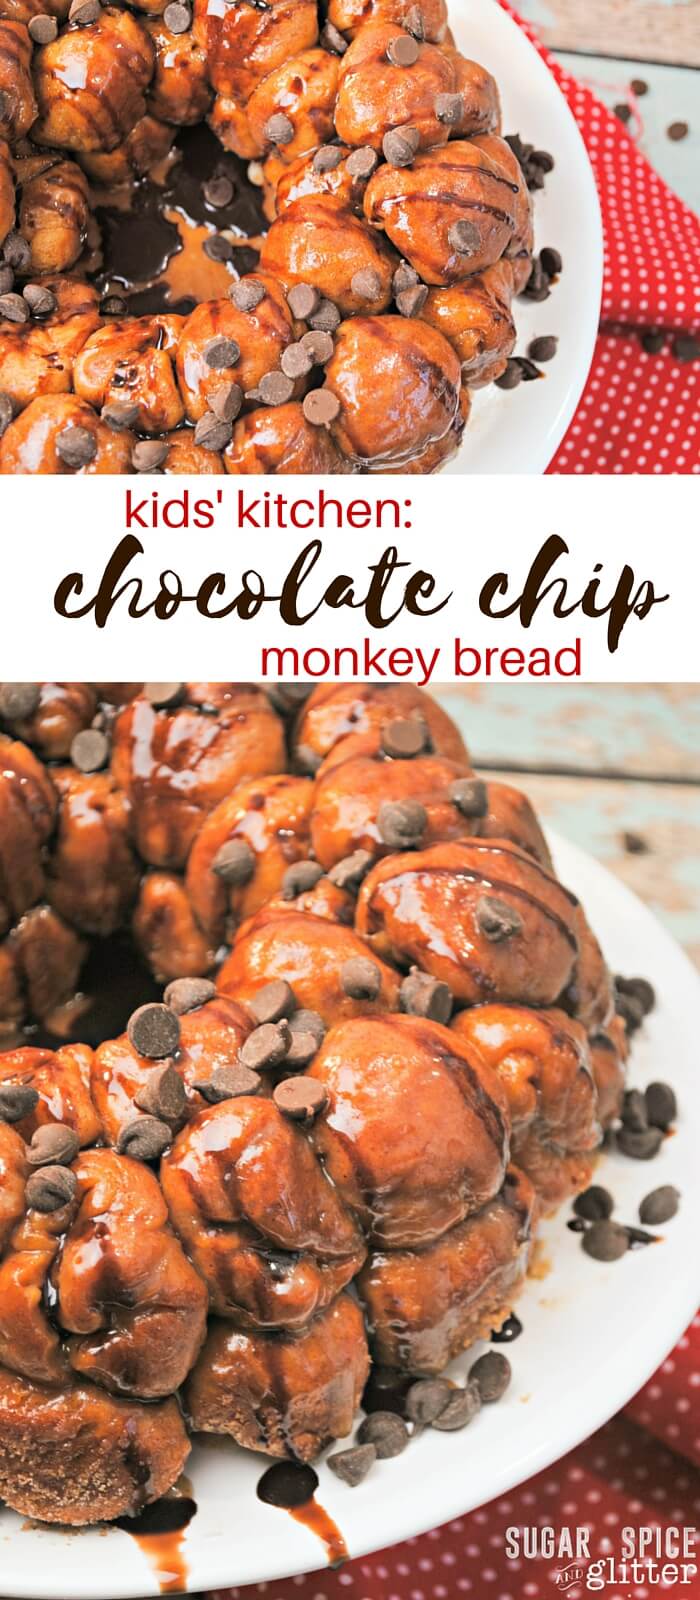 Kids' kitchen is excited to share with you another cooking with kids dessert! Chocolate chip monkey bread is an easy dessert recipe made with simple ingredients. This pull apart bread is perfect for family movie nights or as a quick treat for your next get together. 